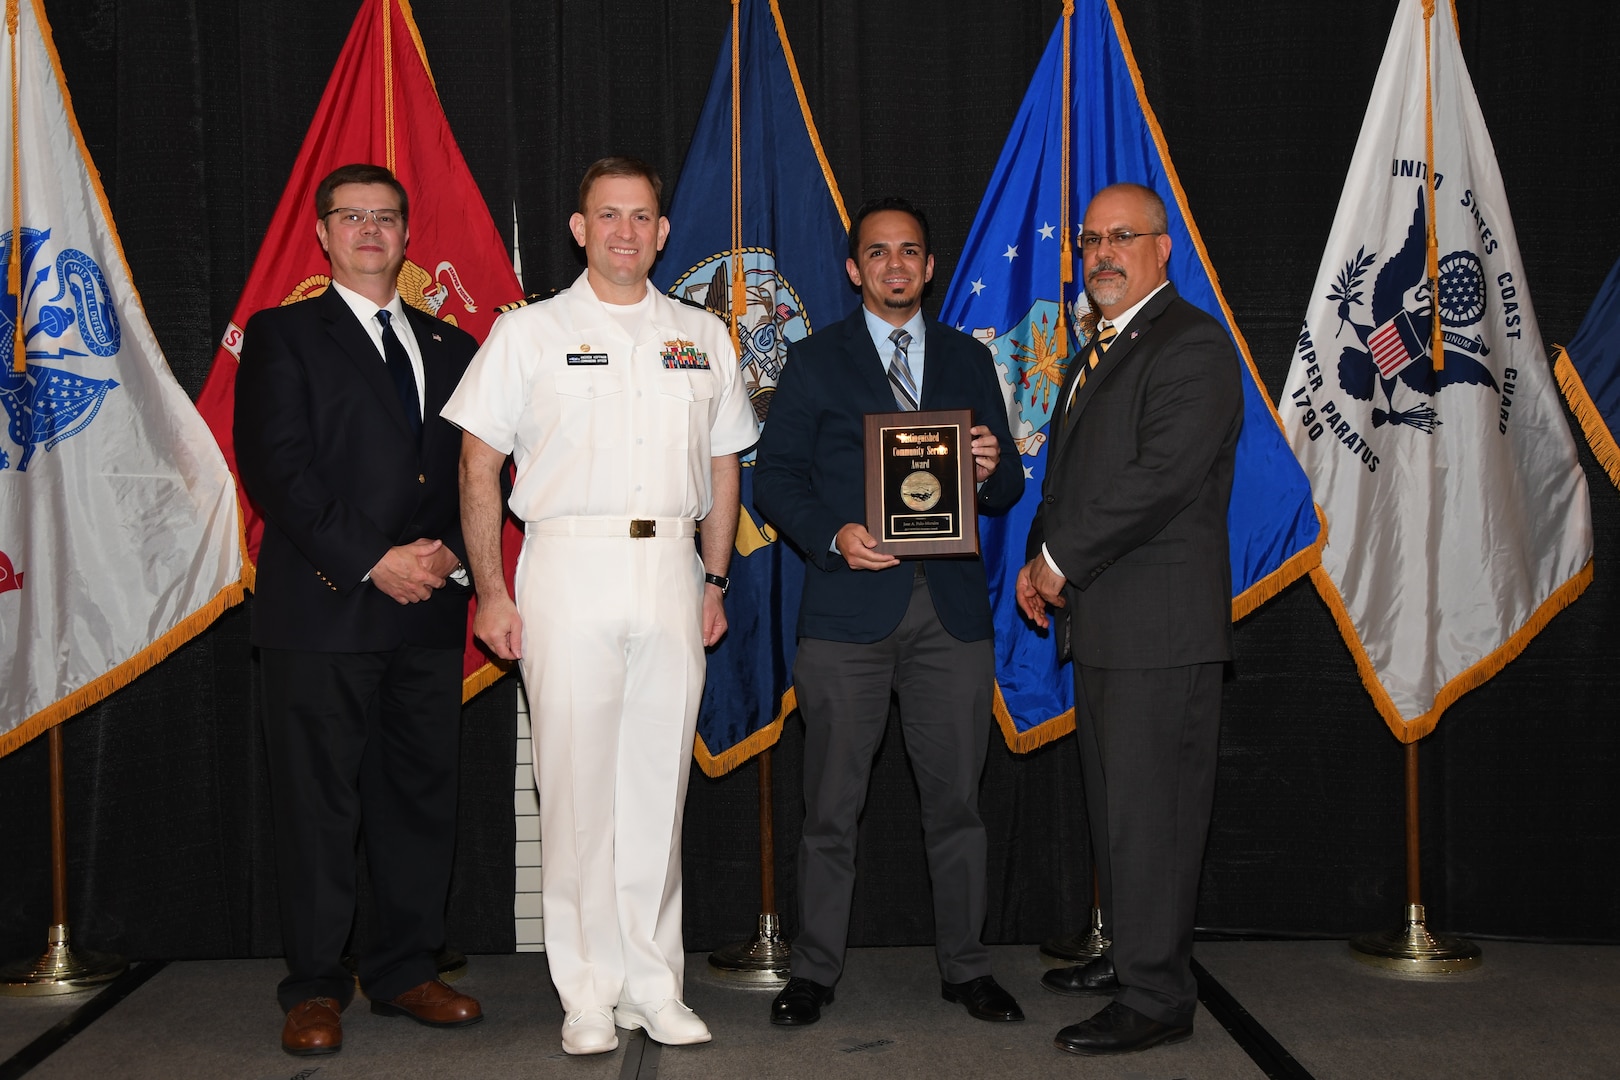 IMAGE: Jose Polo-Morales is presented the Distinguished Community Service Award at Naval Surface Warfare Center Dahlgren Division's annual awards ceremony, Apr. 26 at the Fredericksburg Expo and Conference Center.